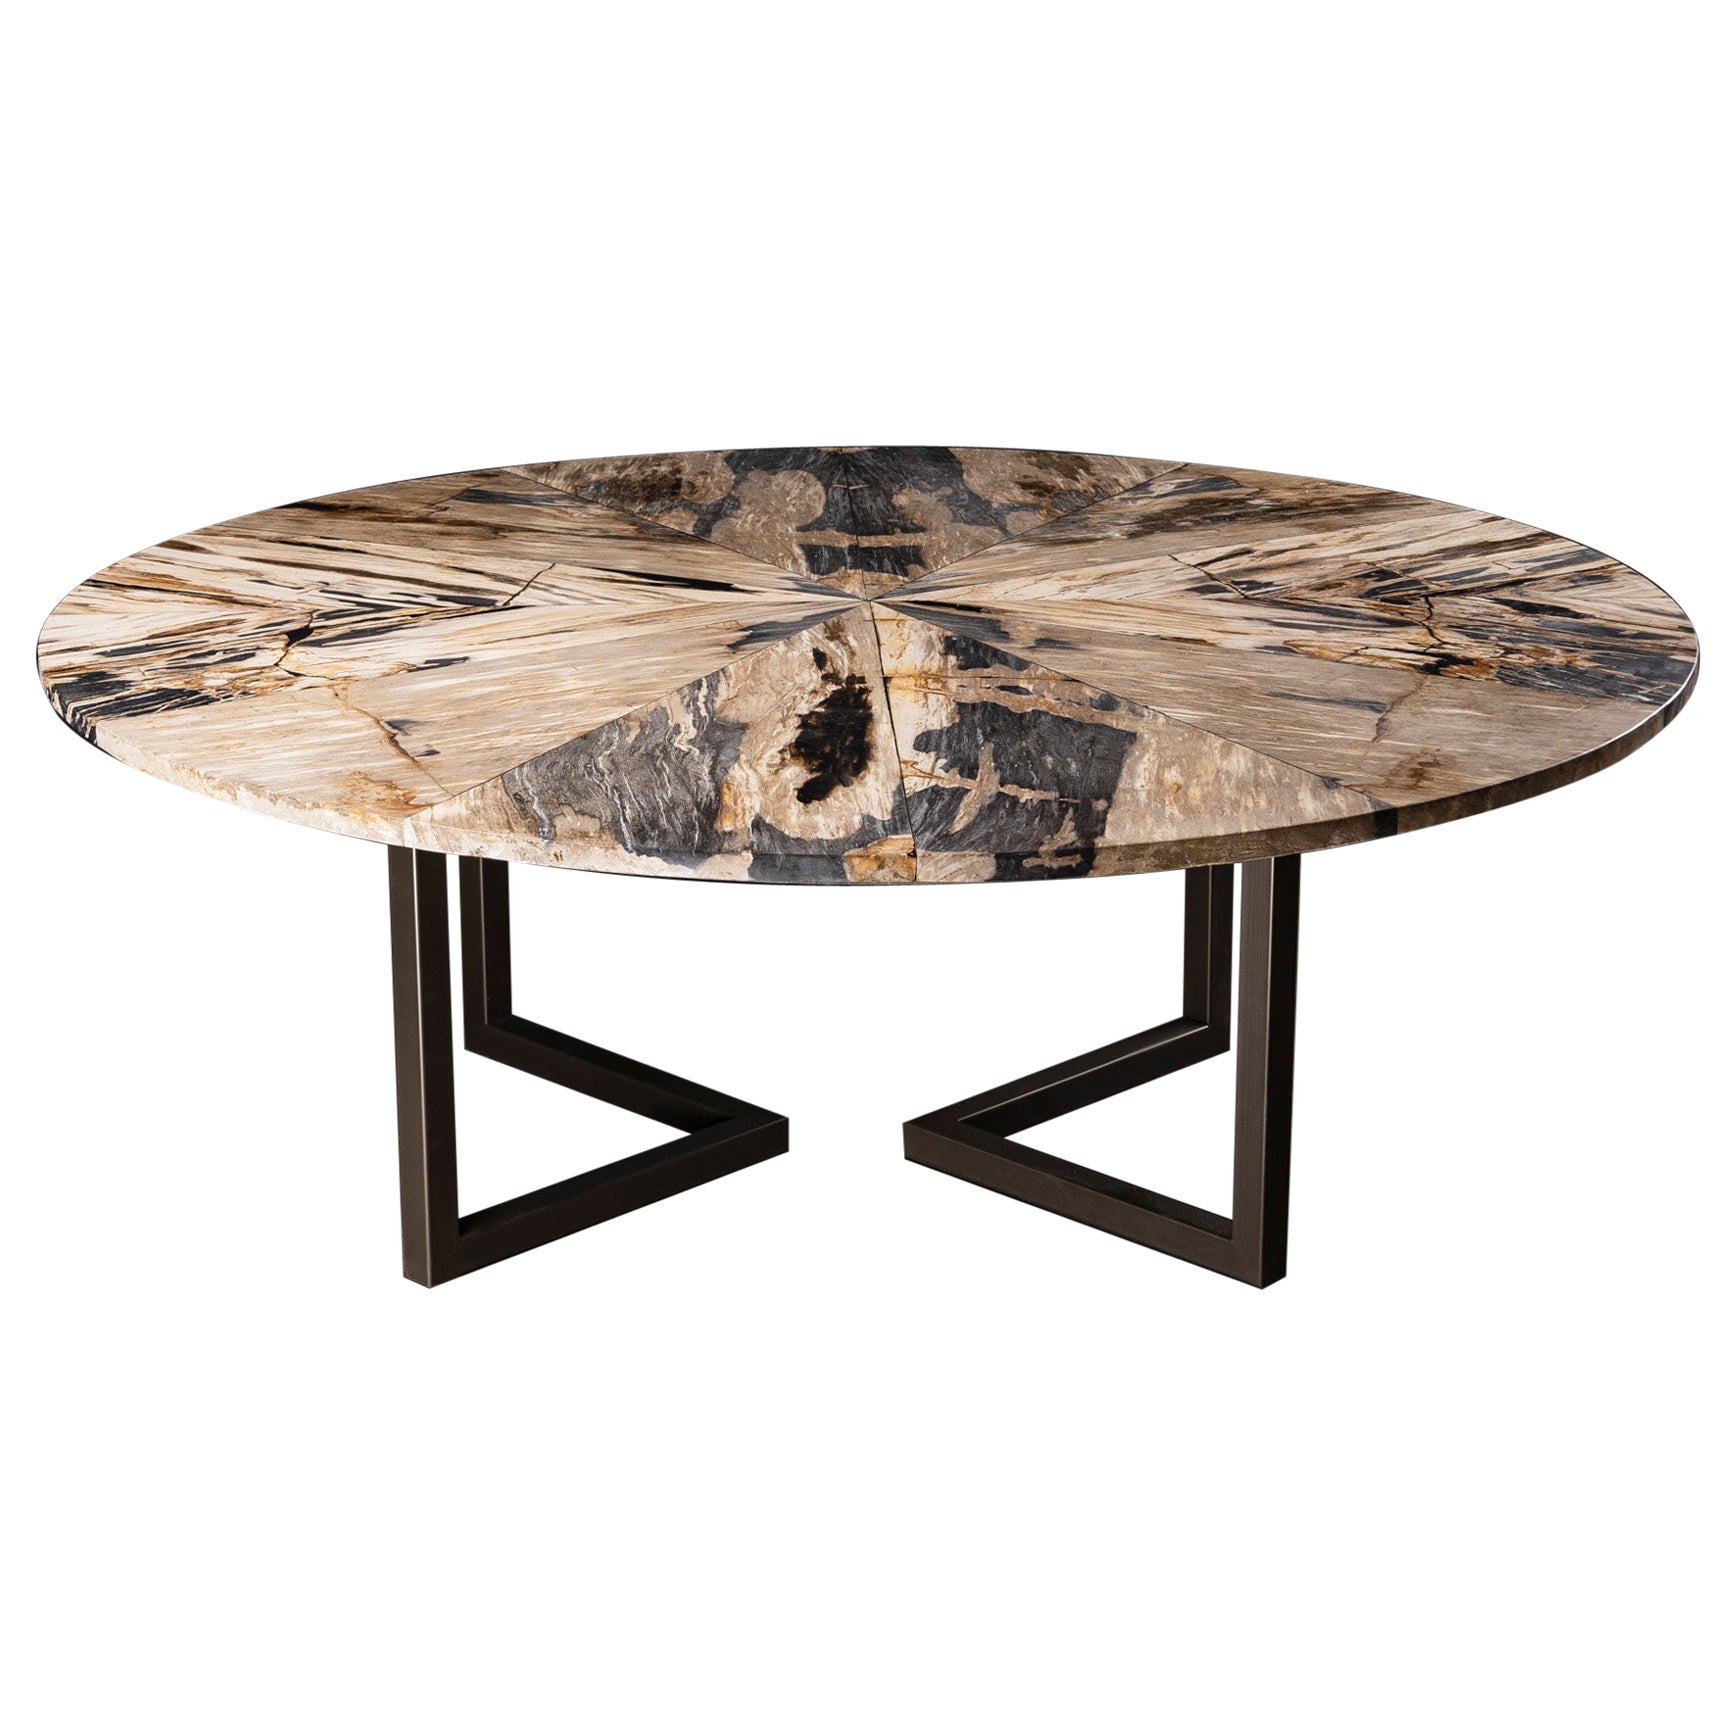 80" Round Petrified Wood Dinning Table with Metal Base For Sale